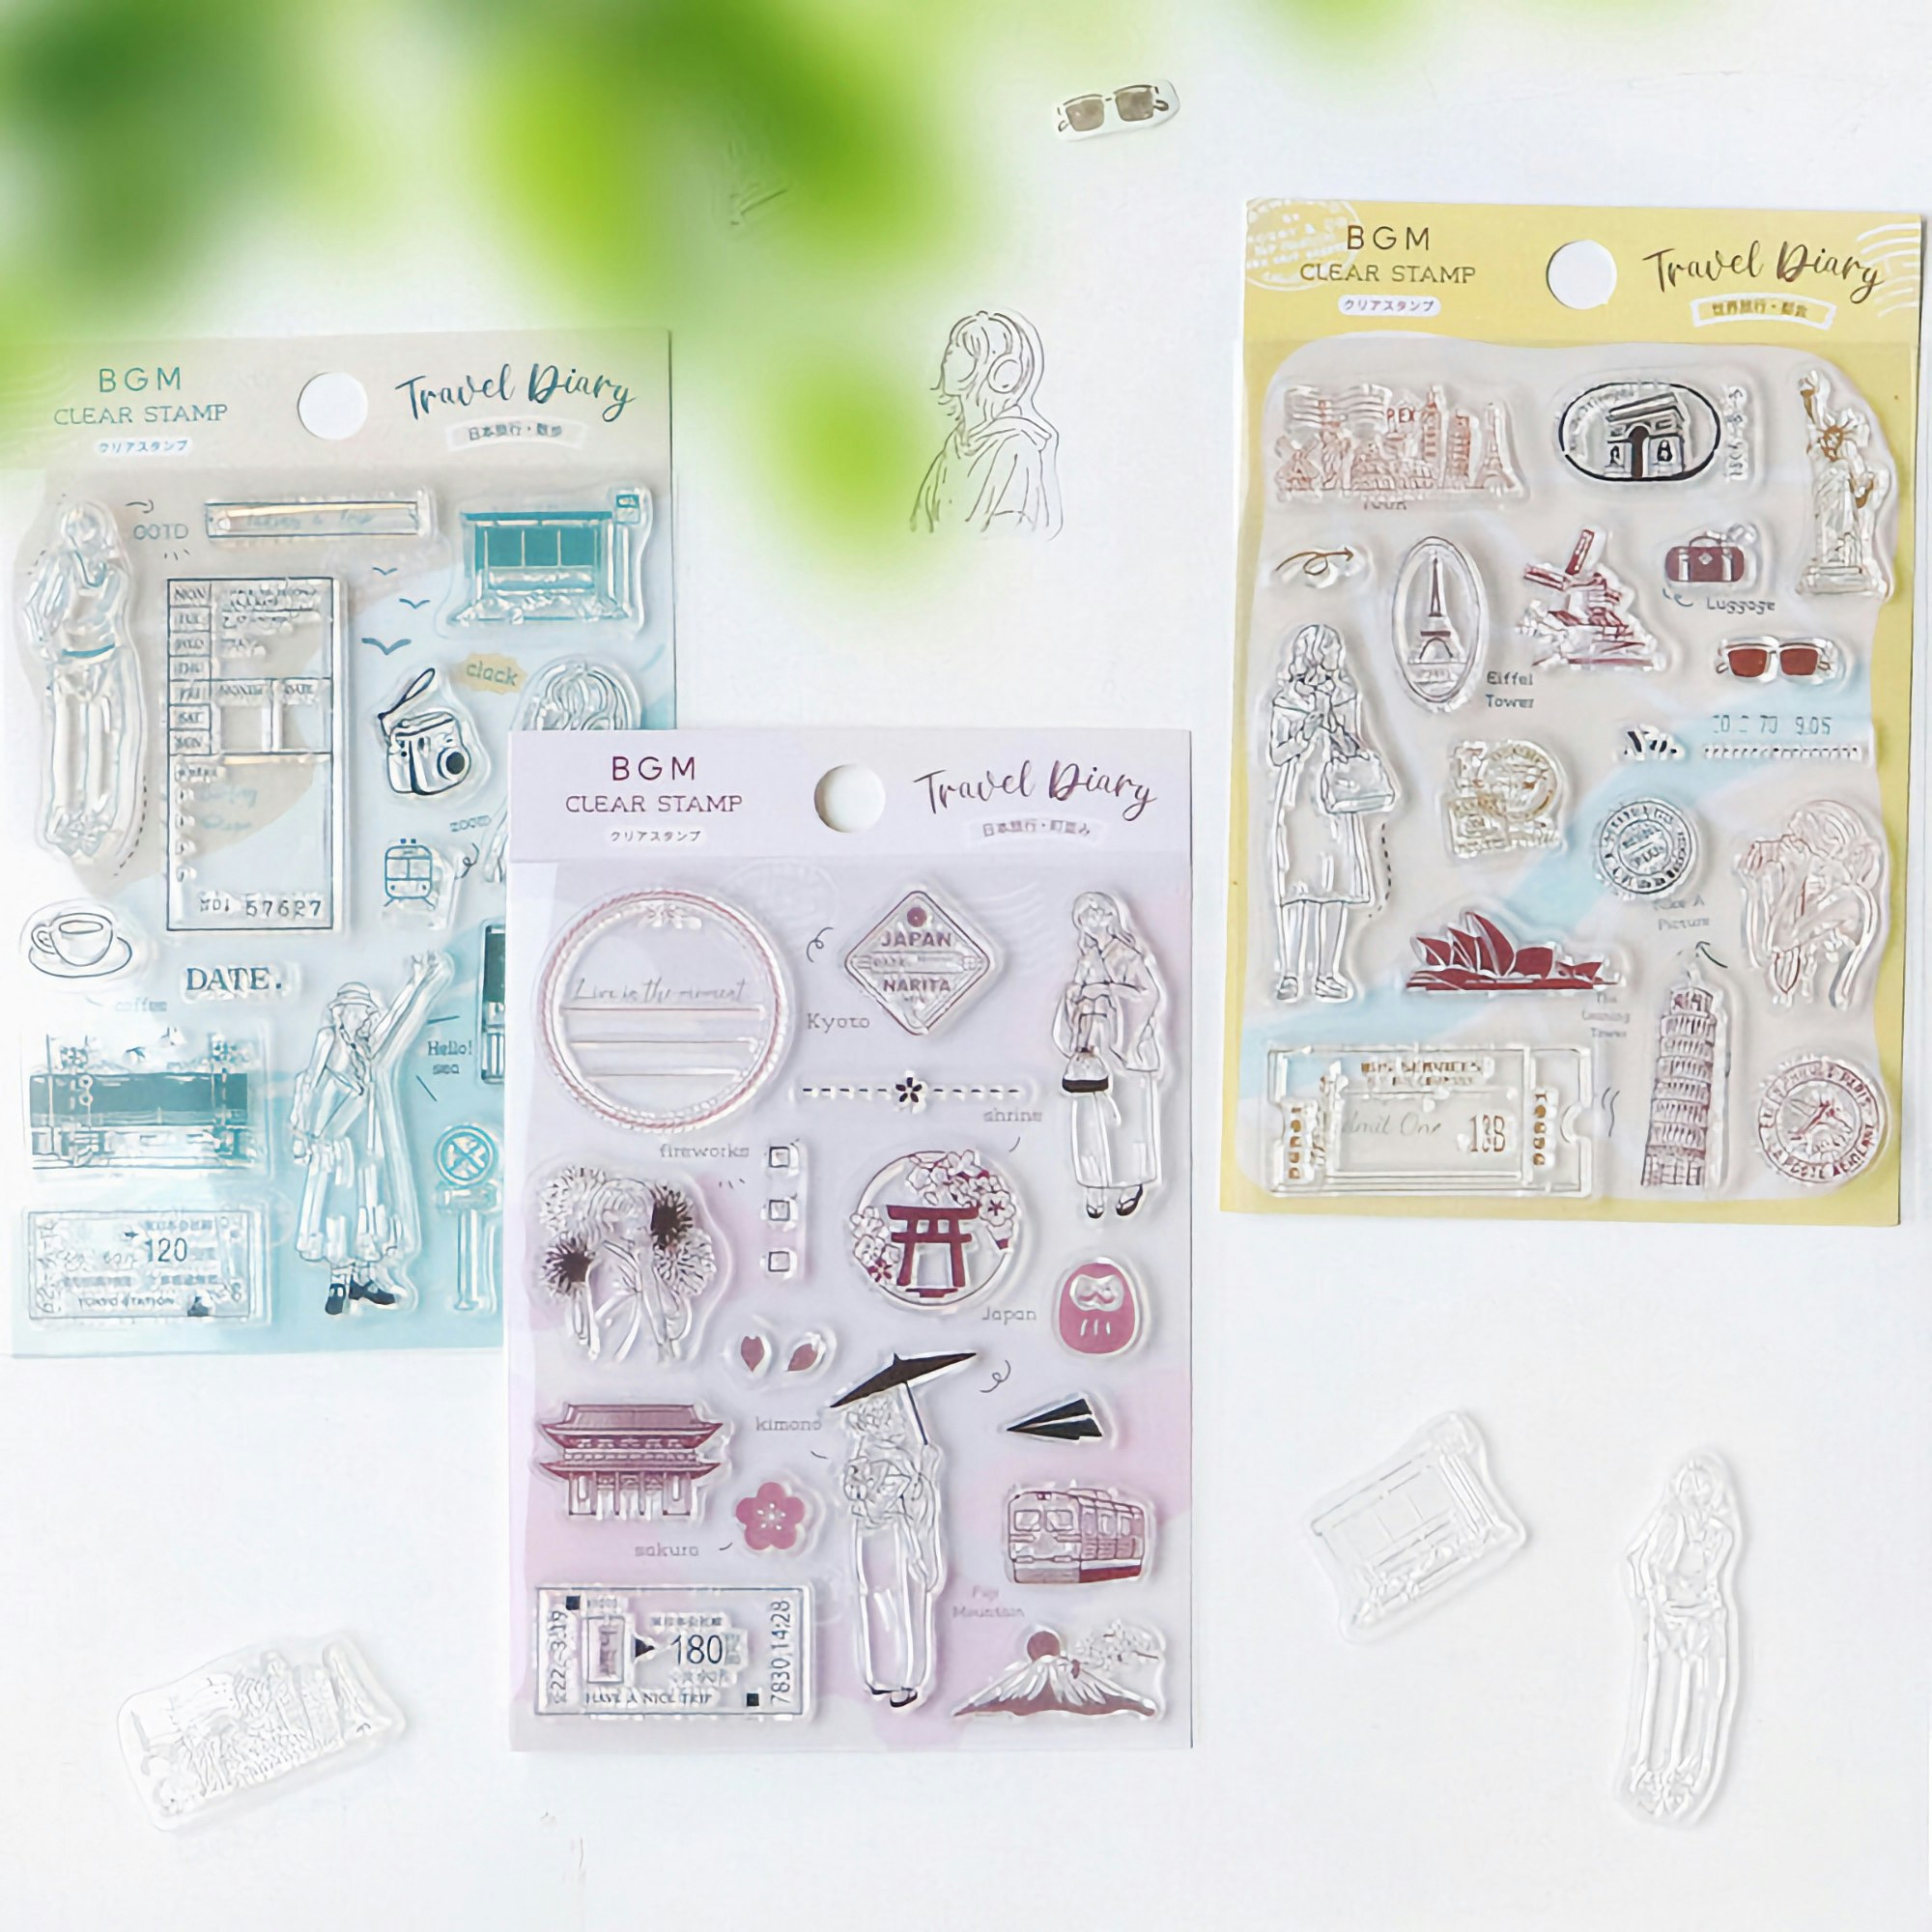 BGM Clear Stamp Travel Diary / Japan Walking